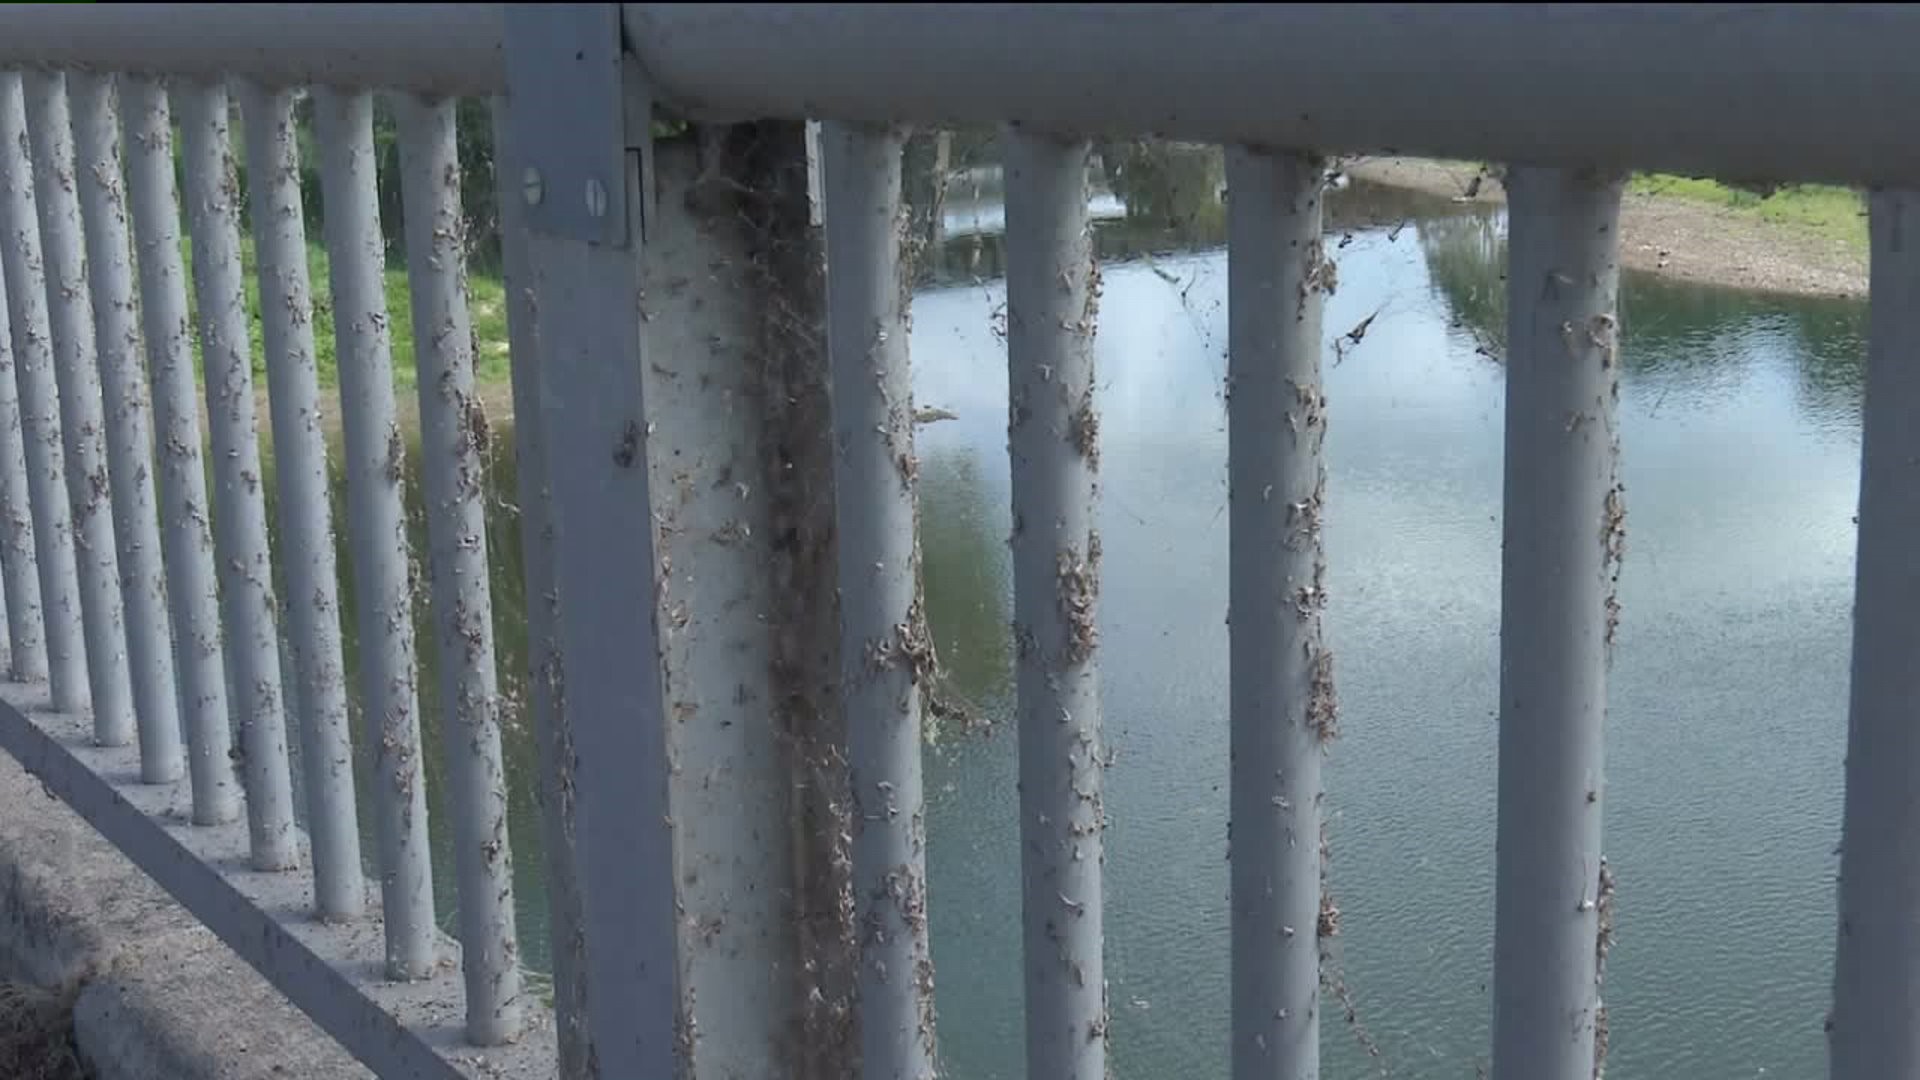 Dead Bugs on Bridge Result in Smelly Situation